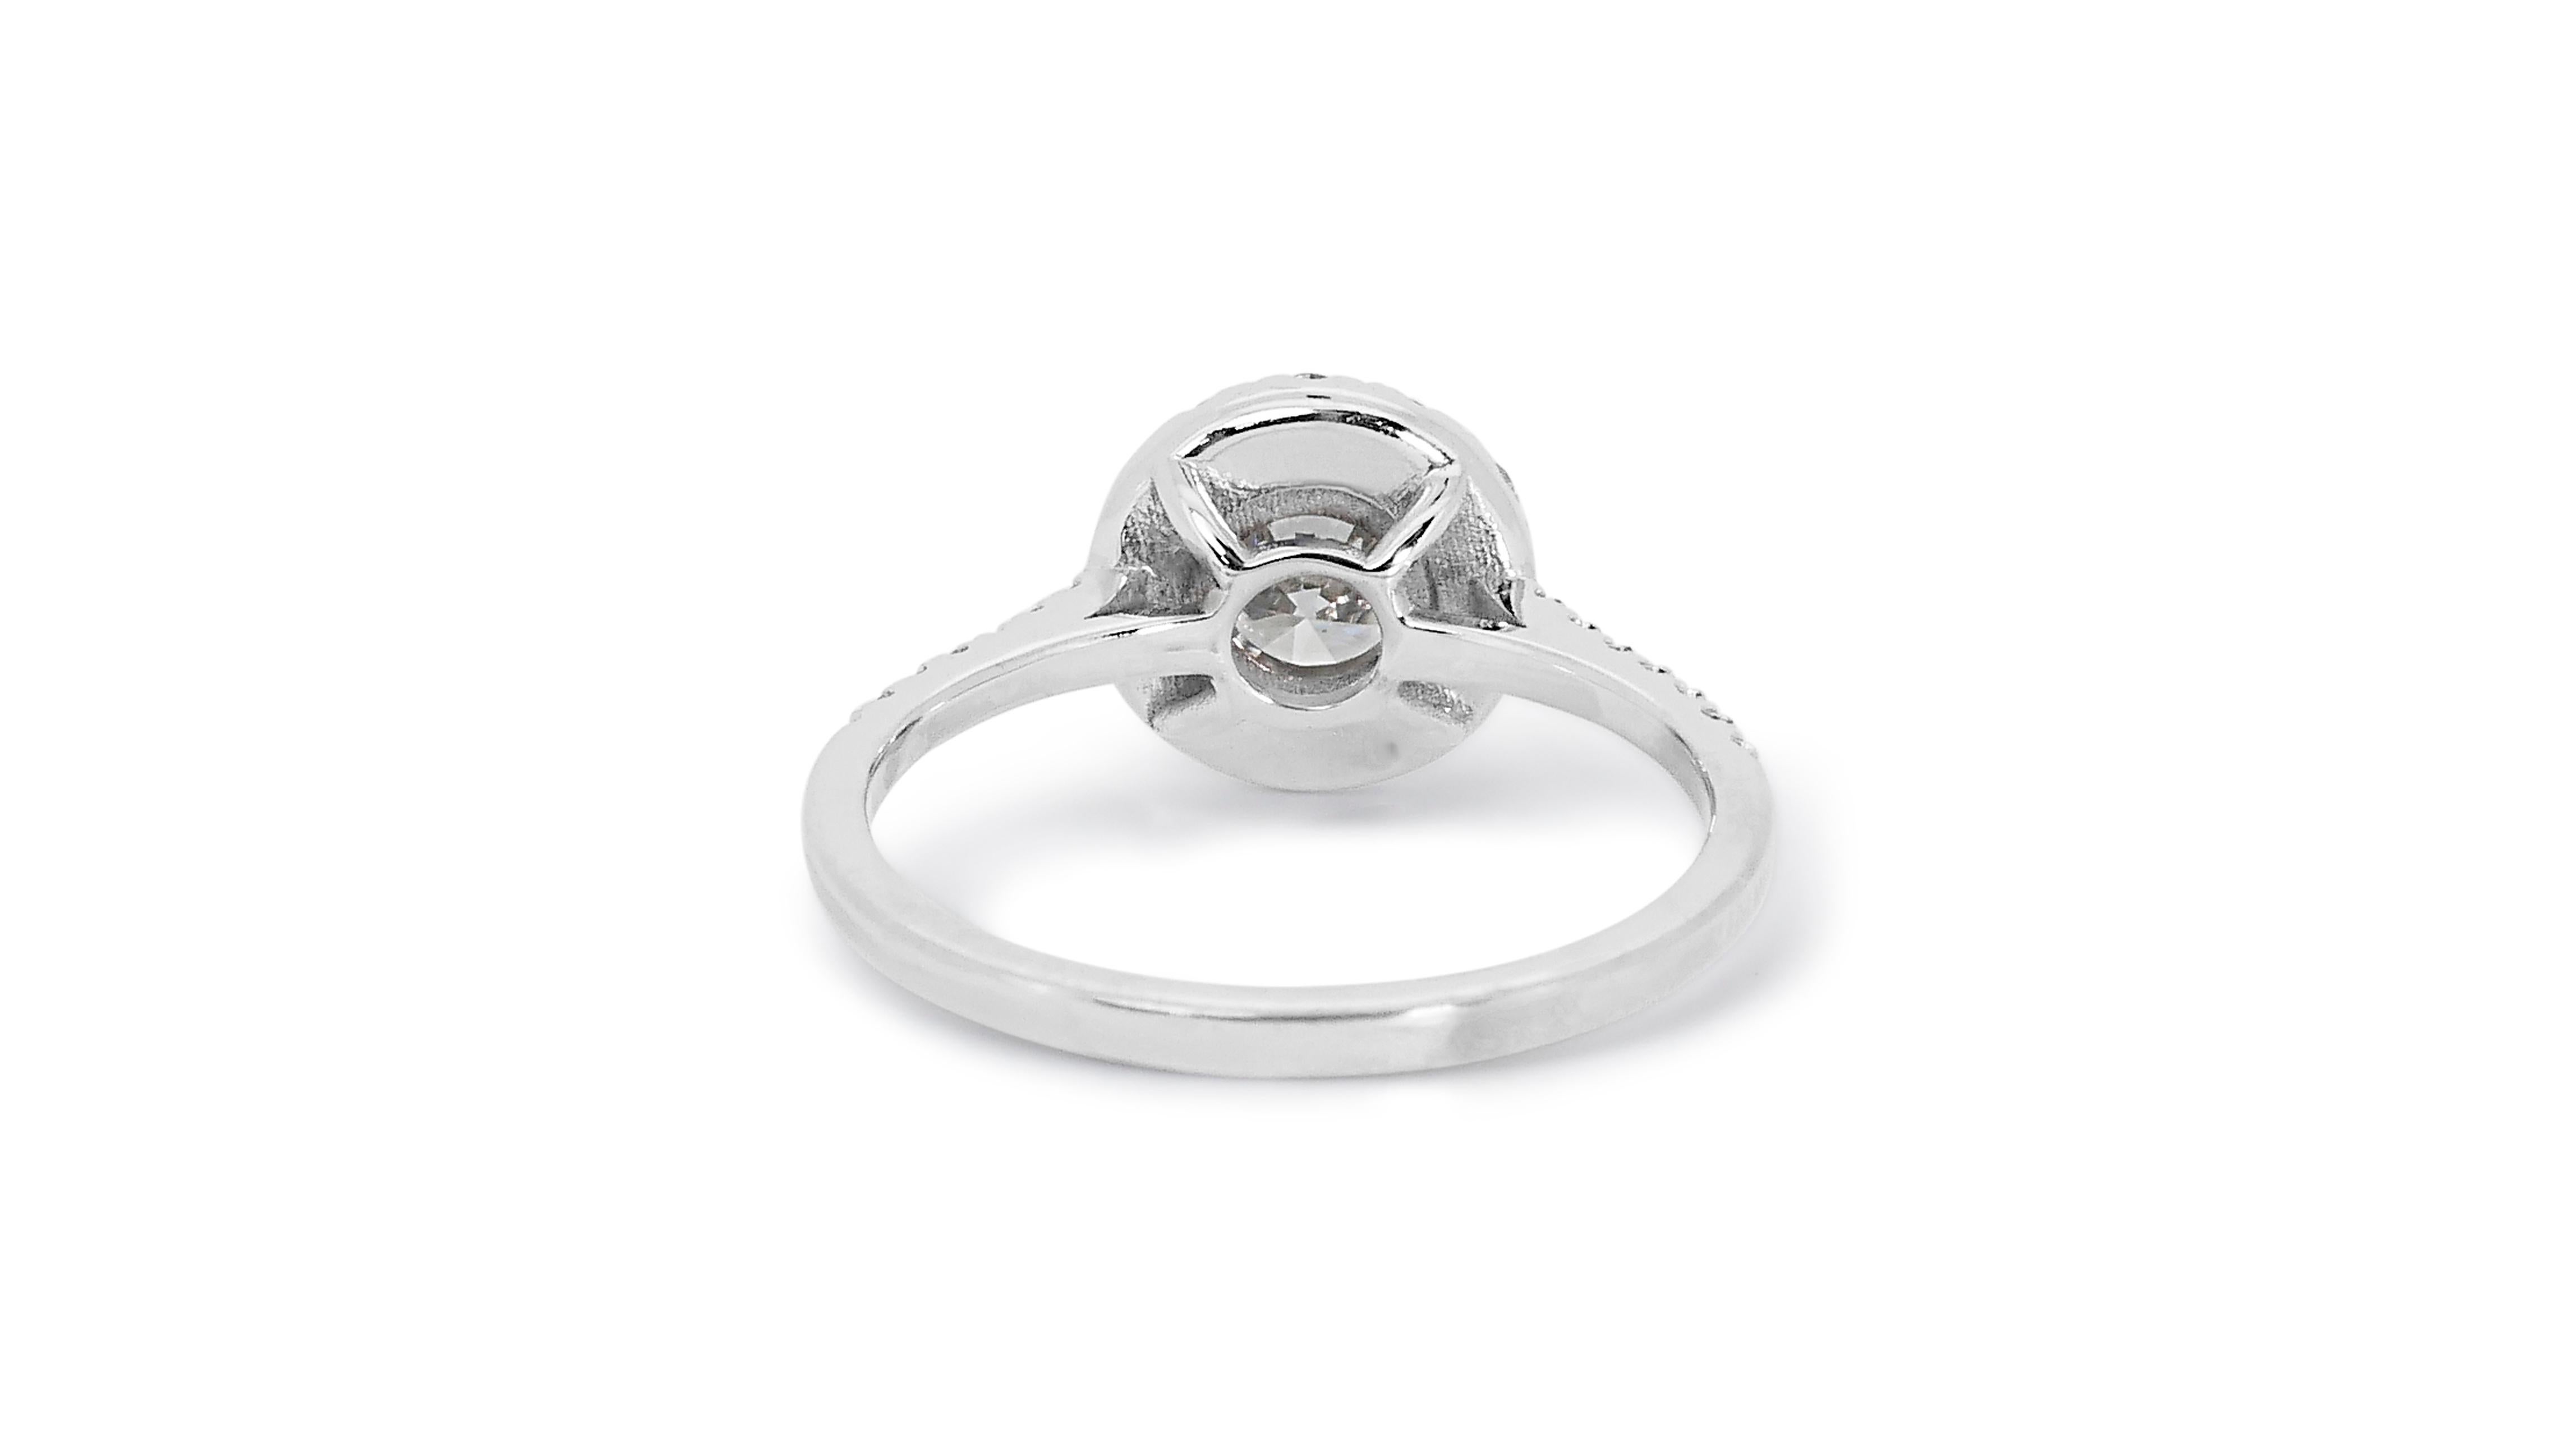 Glamorous 1.30ct Diamonds Halo Ring in 18k White Gold - GIA Certified For Sale 3